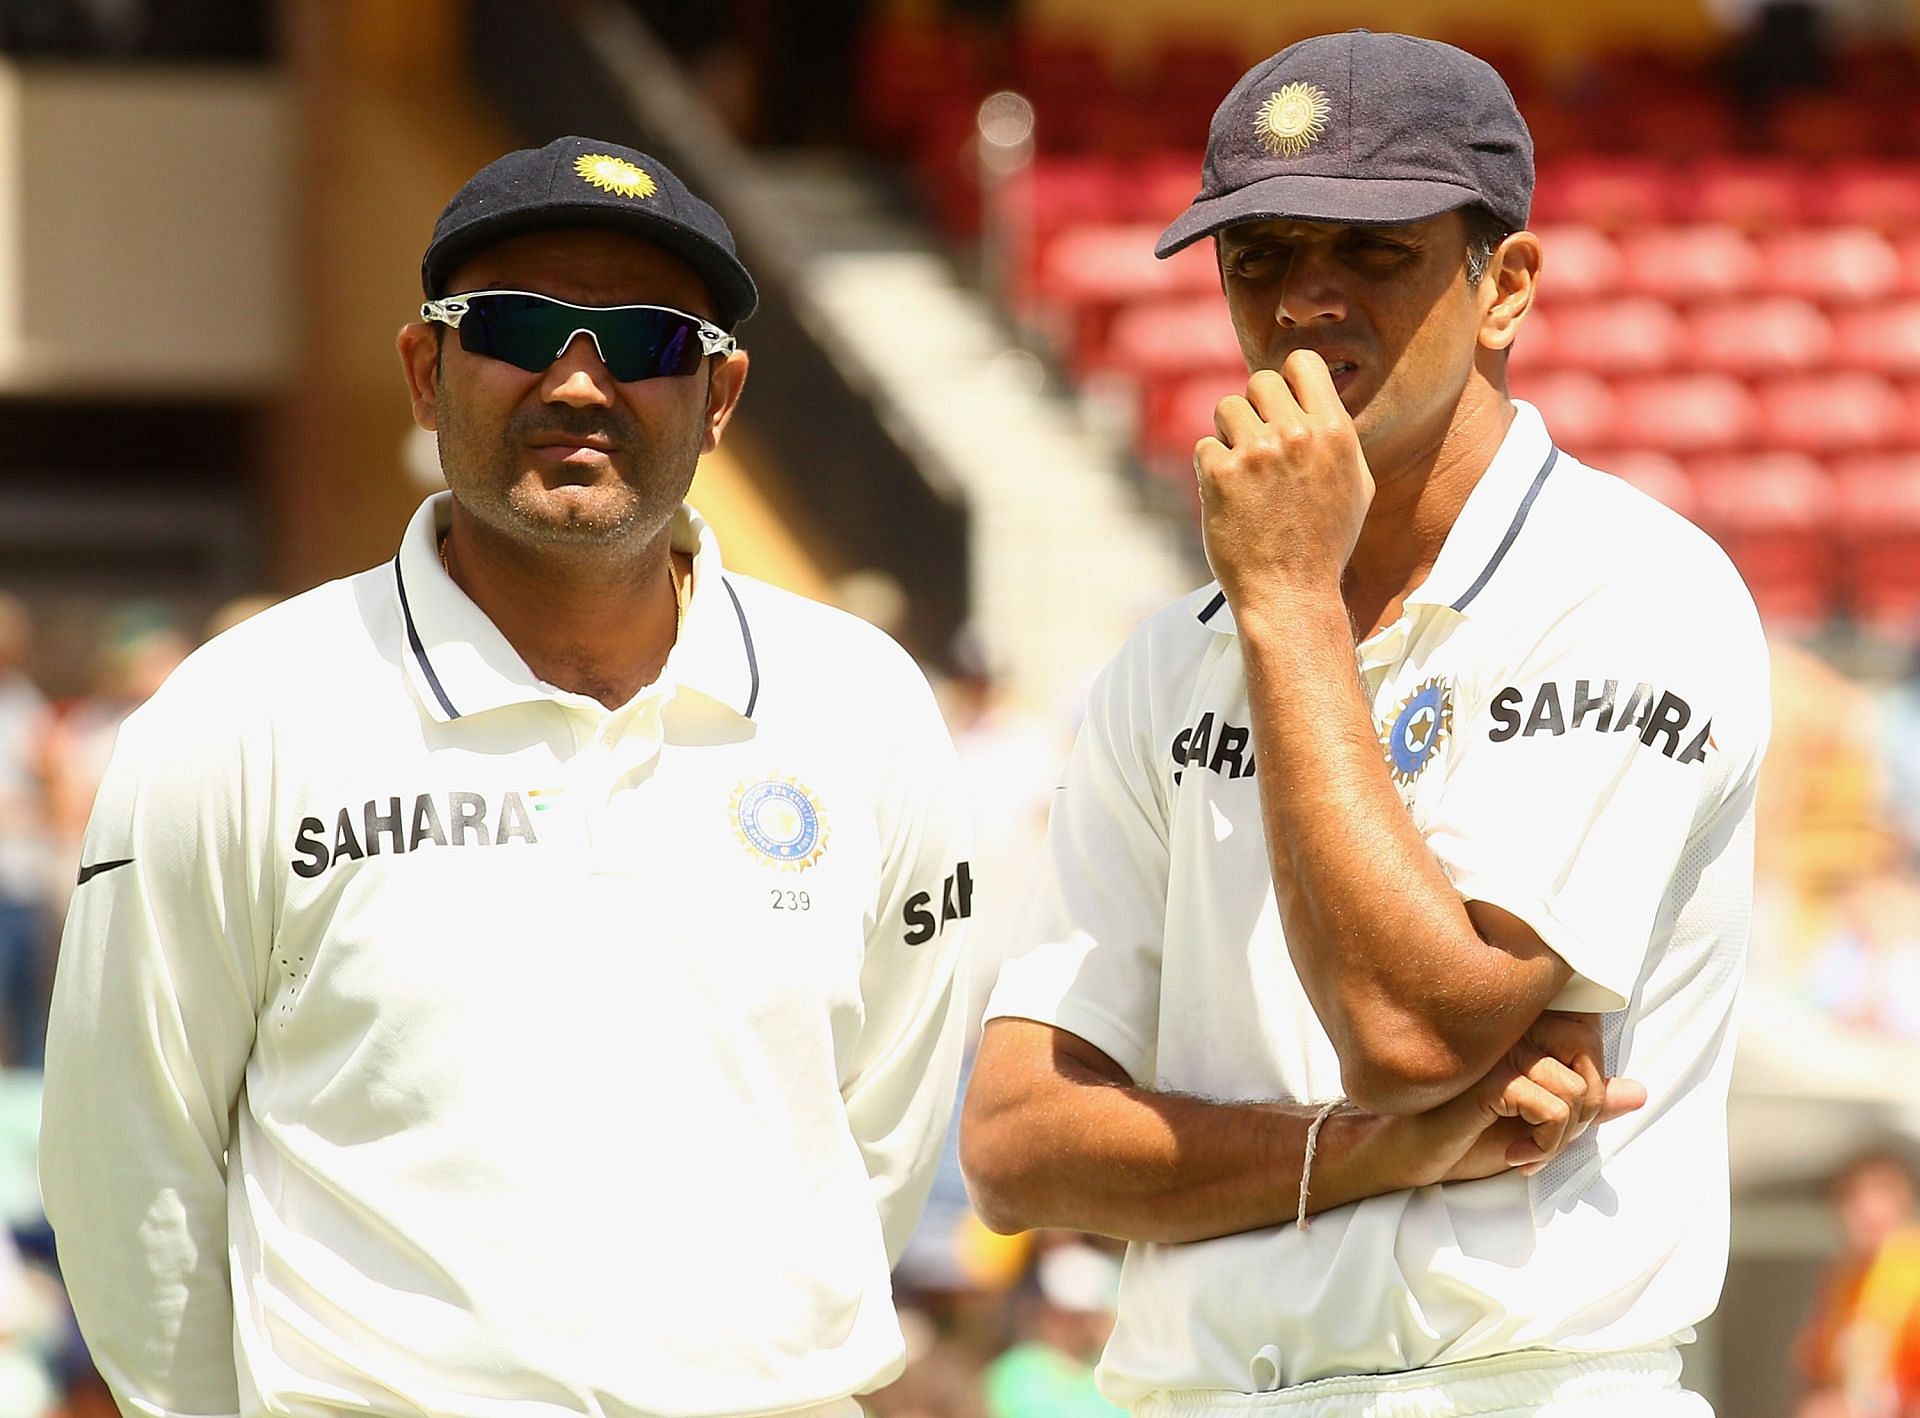 Virender Sehwag and Rahul Dravid once played for Team India together